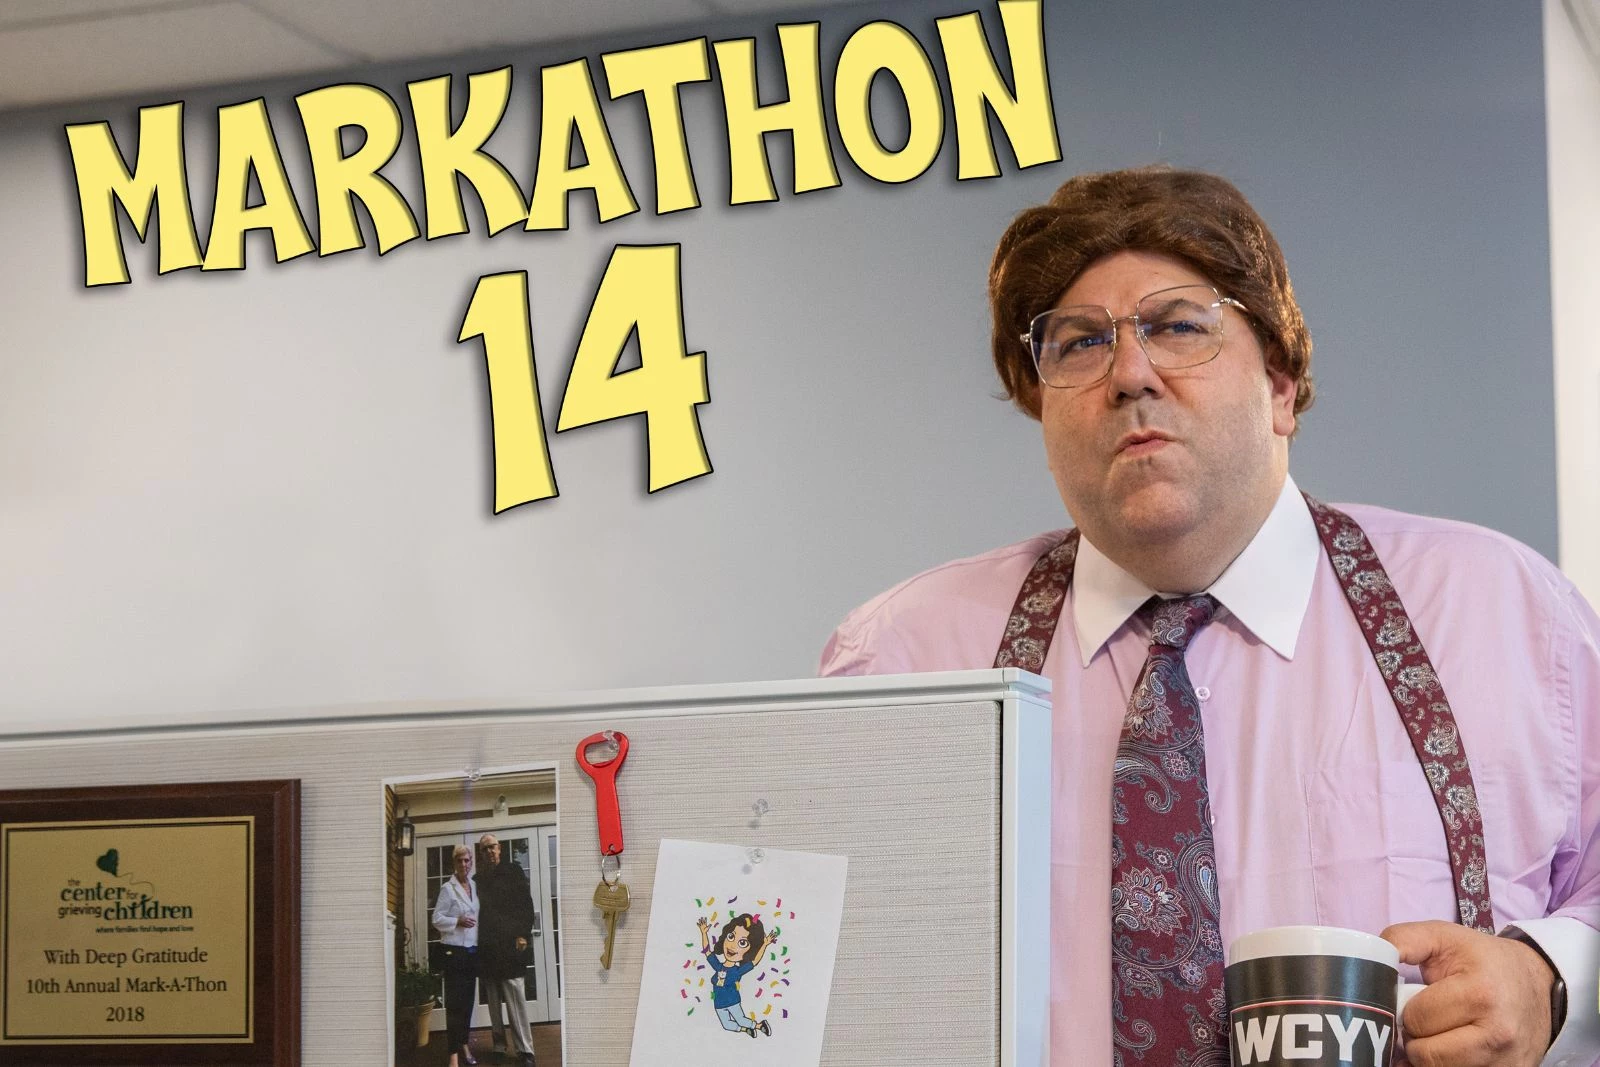 Heres How You Can Bid on All the Markathon 14 Auction Items